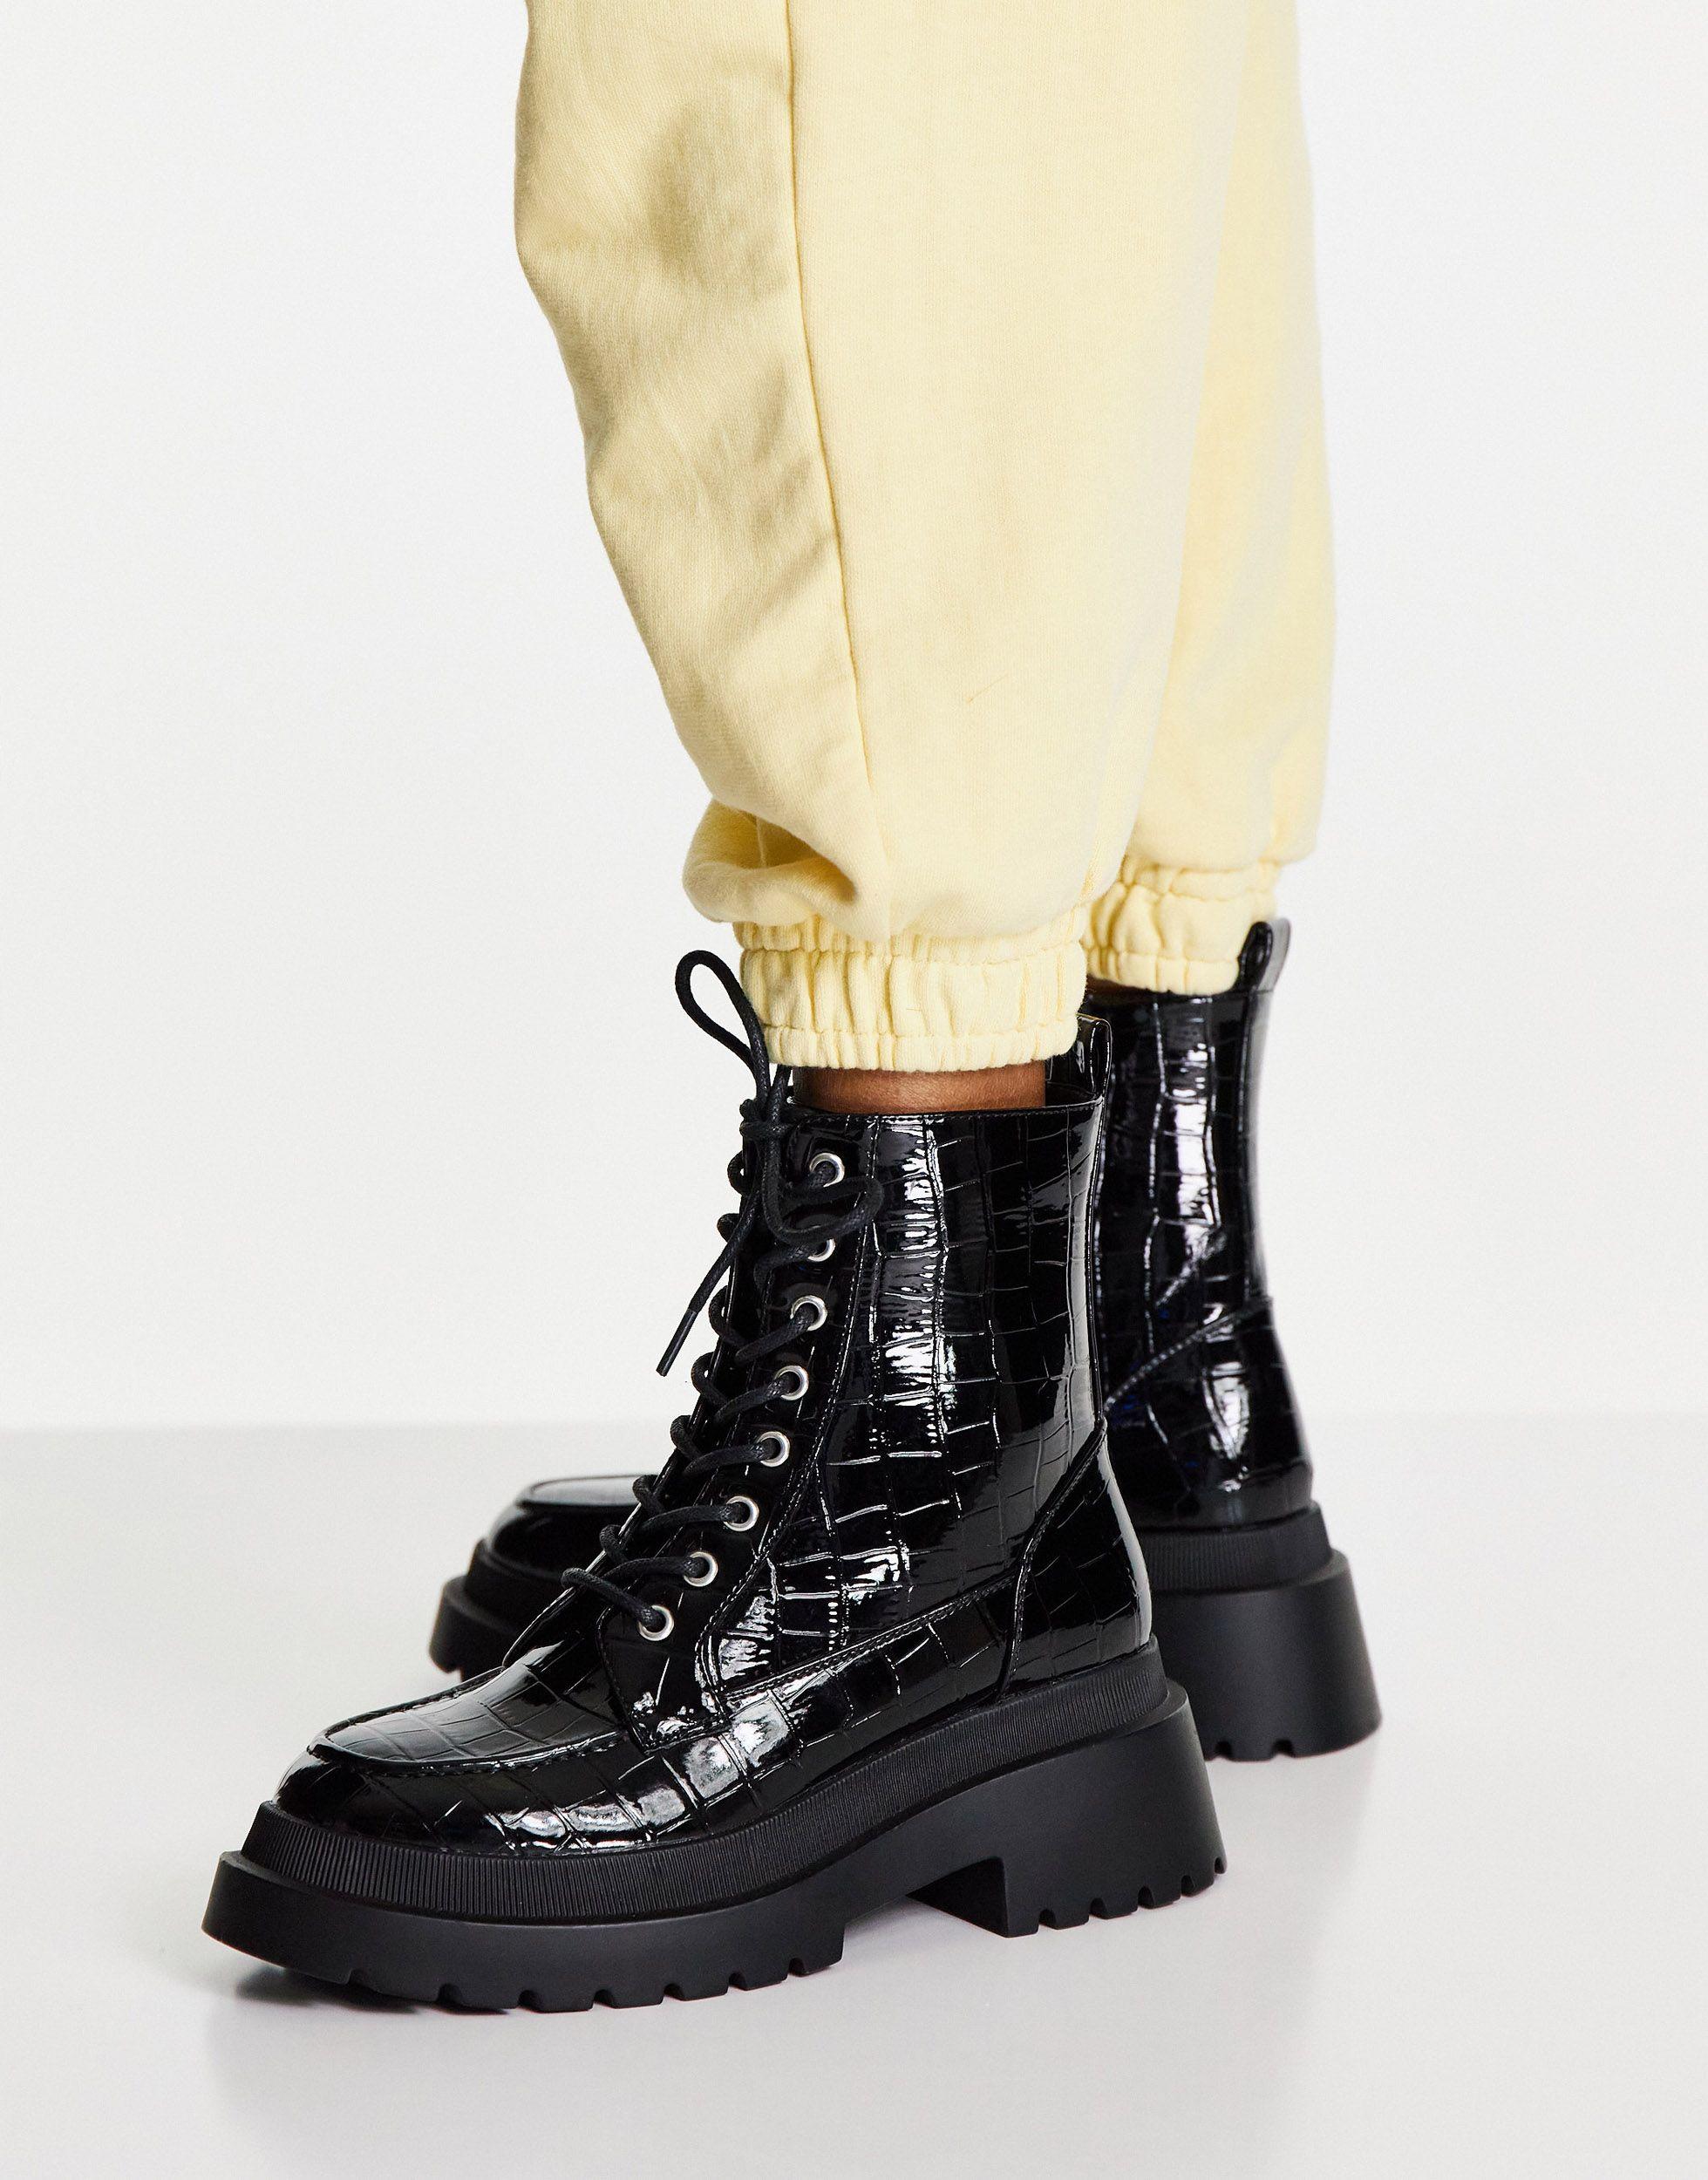 TOPSHOP Kara Chunky Croc Lace Up Boot in Black | Lyst